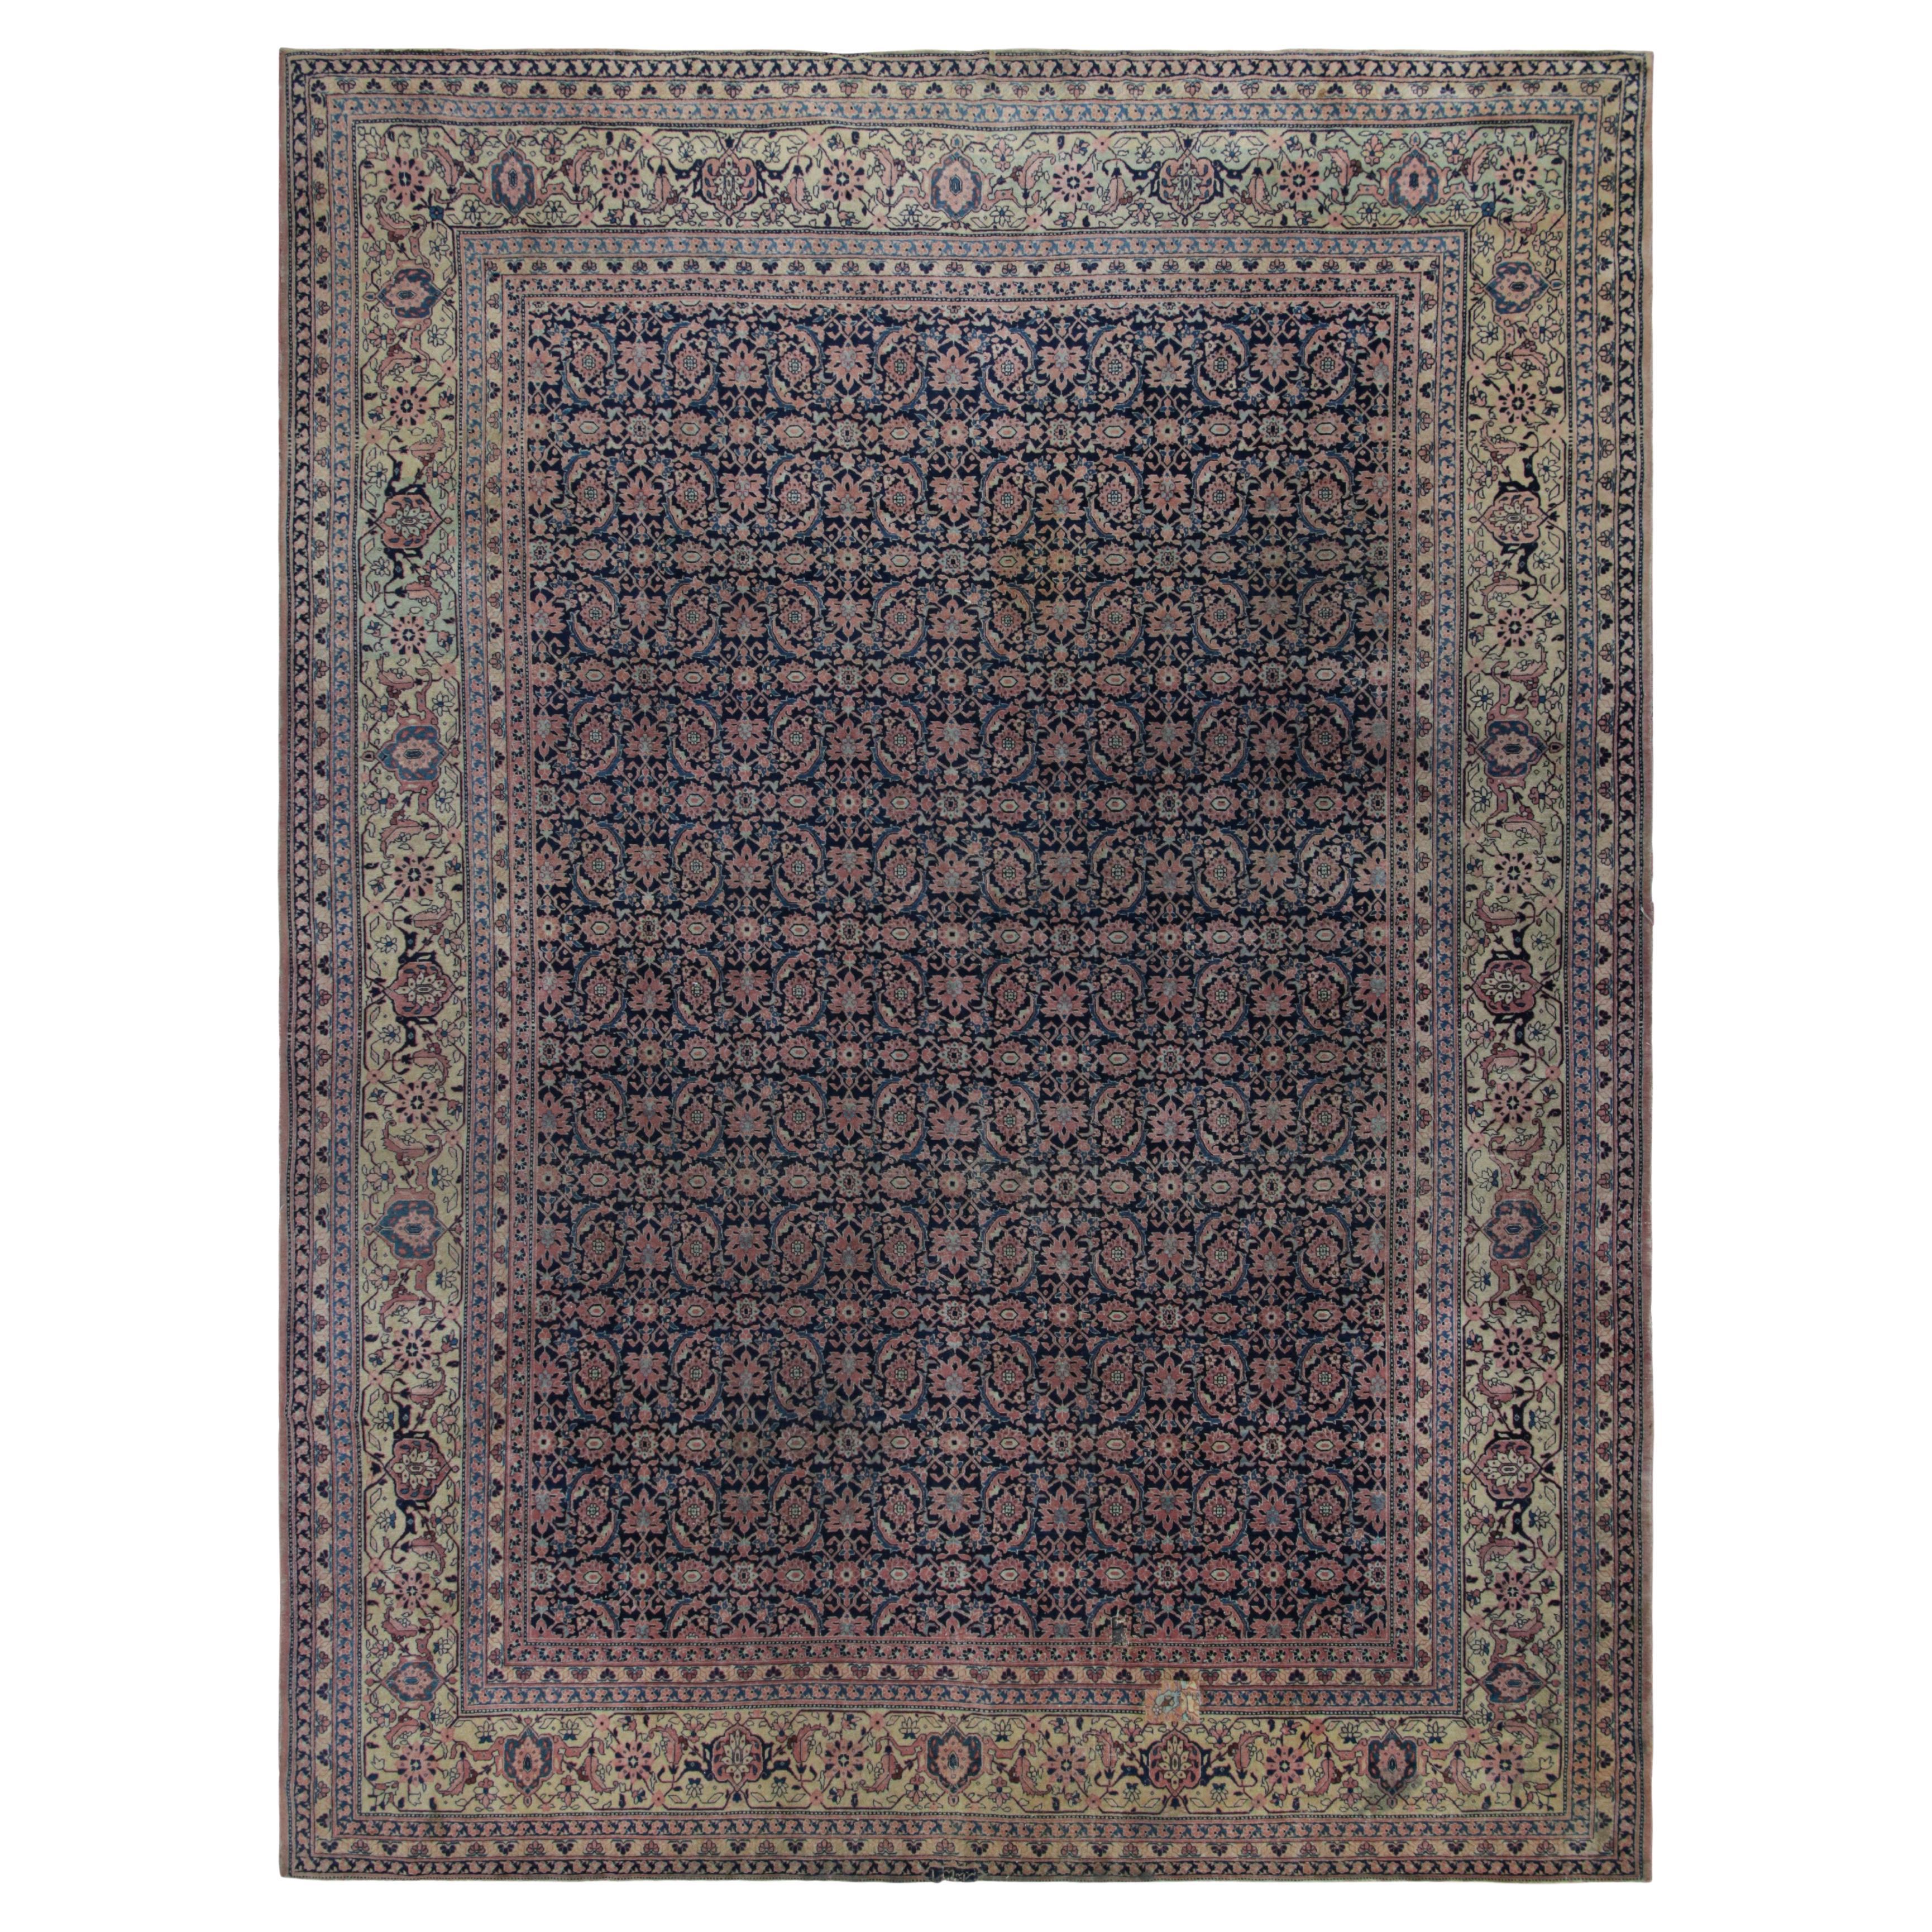 Antique Khorassan Rug in Navy Blue and Gold with Floral Patterns by Rug & Kilim